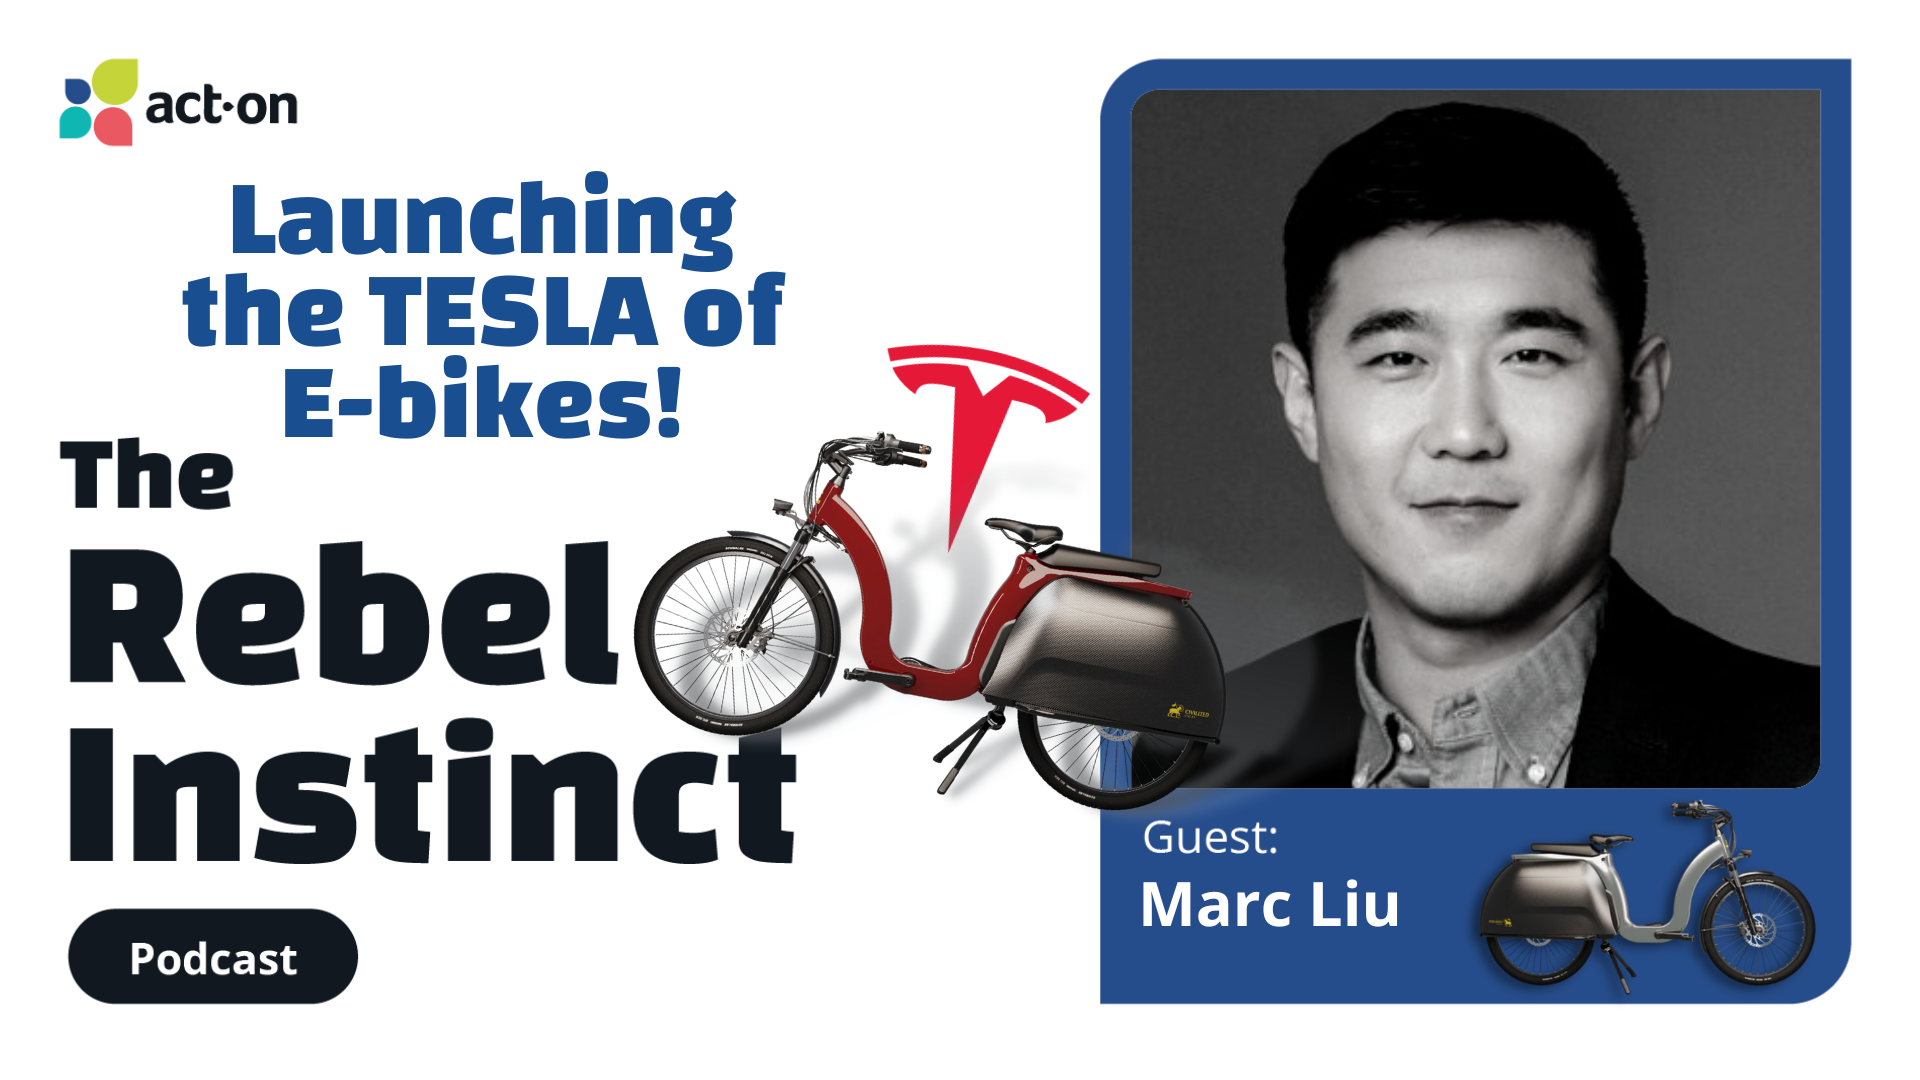 Marc Liu, chief revenue officer of the startup Civilized Cycle, fought through COVID-19 production issues to launch the TESLA of e-bikes.